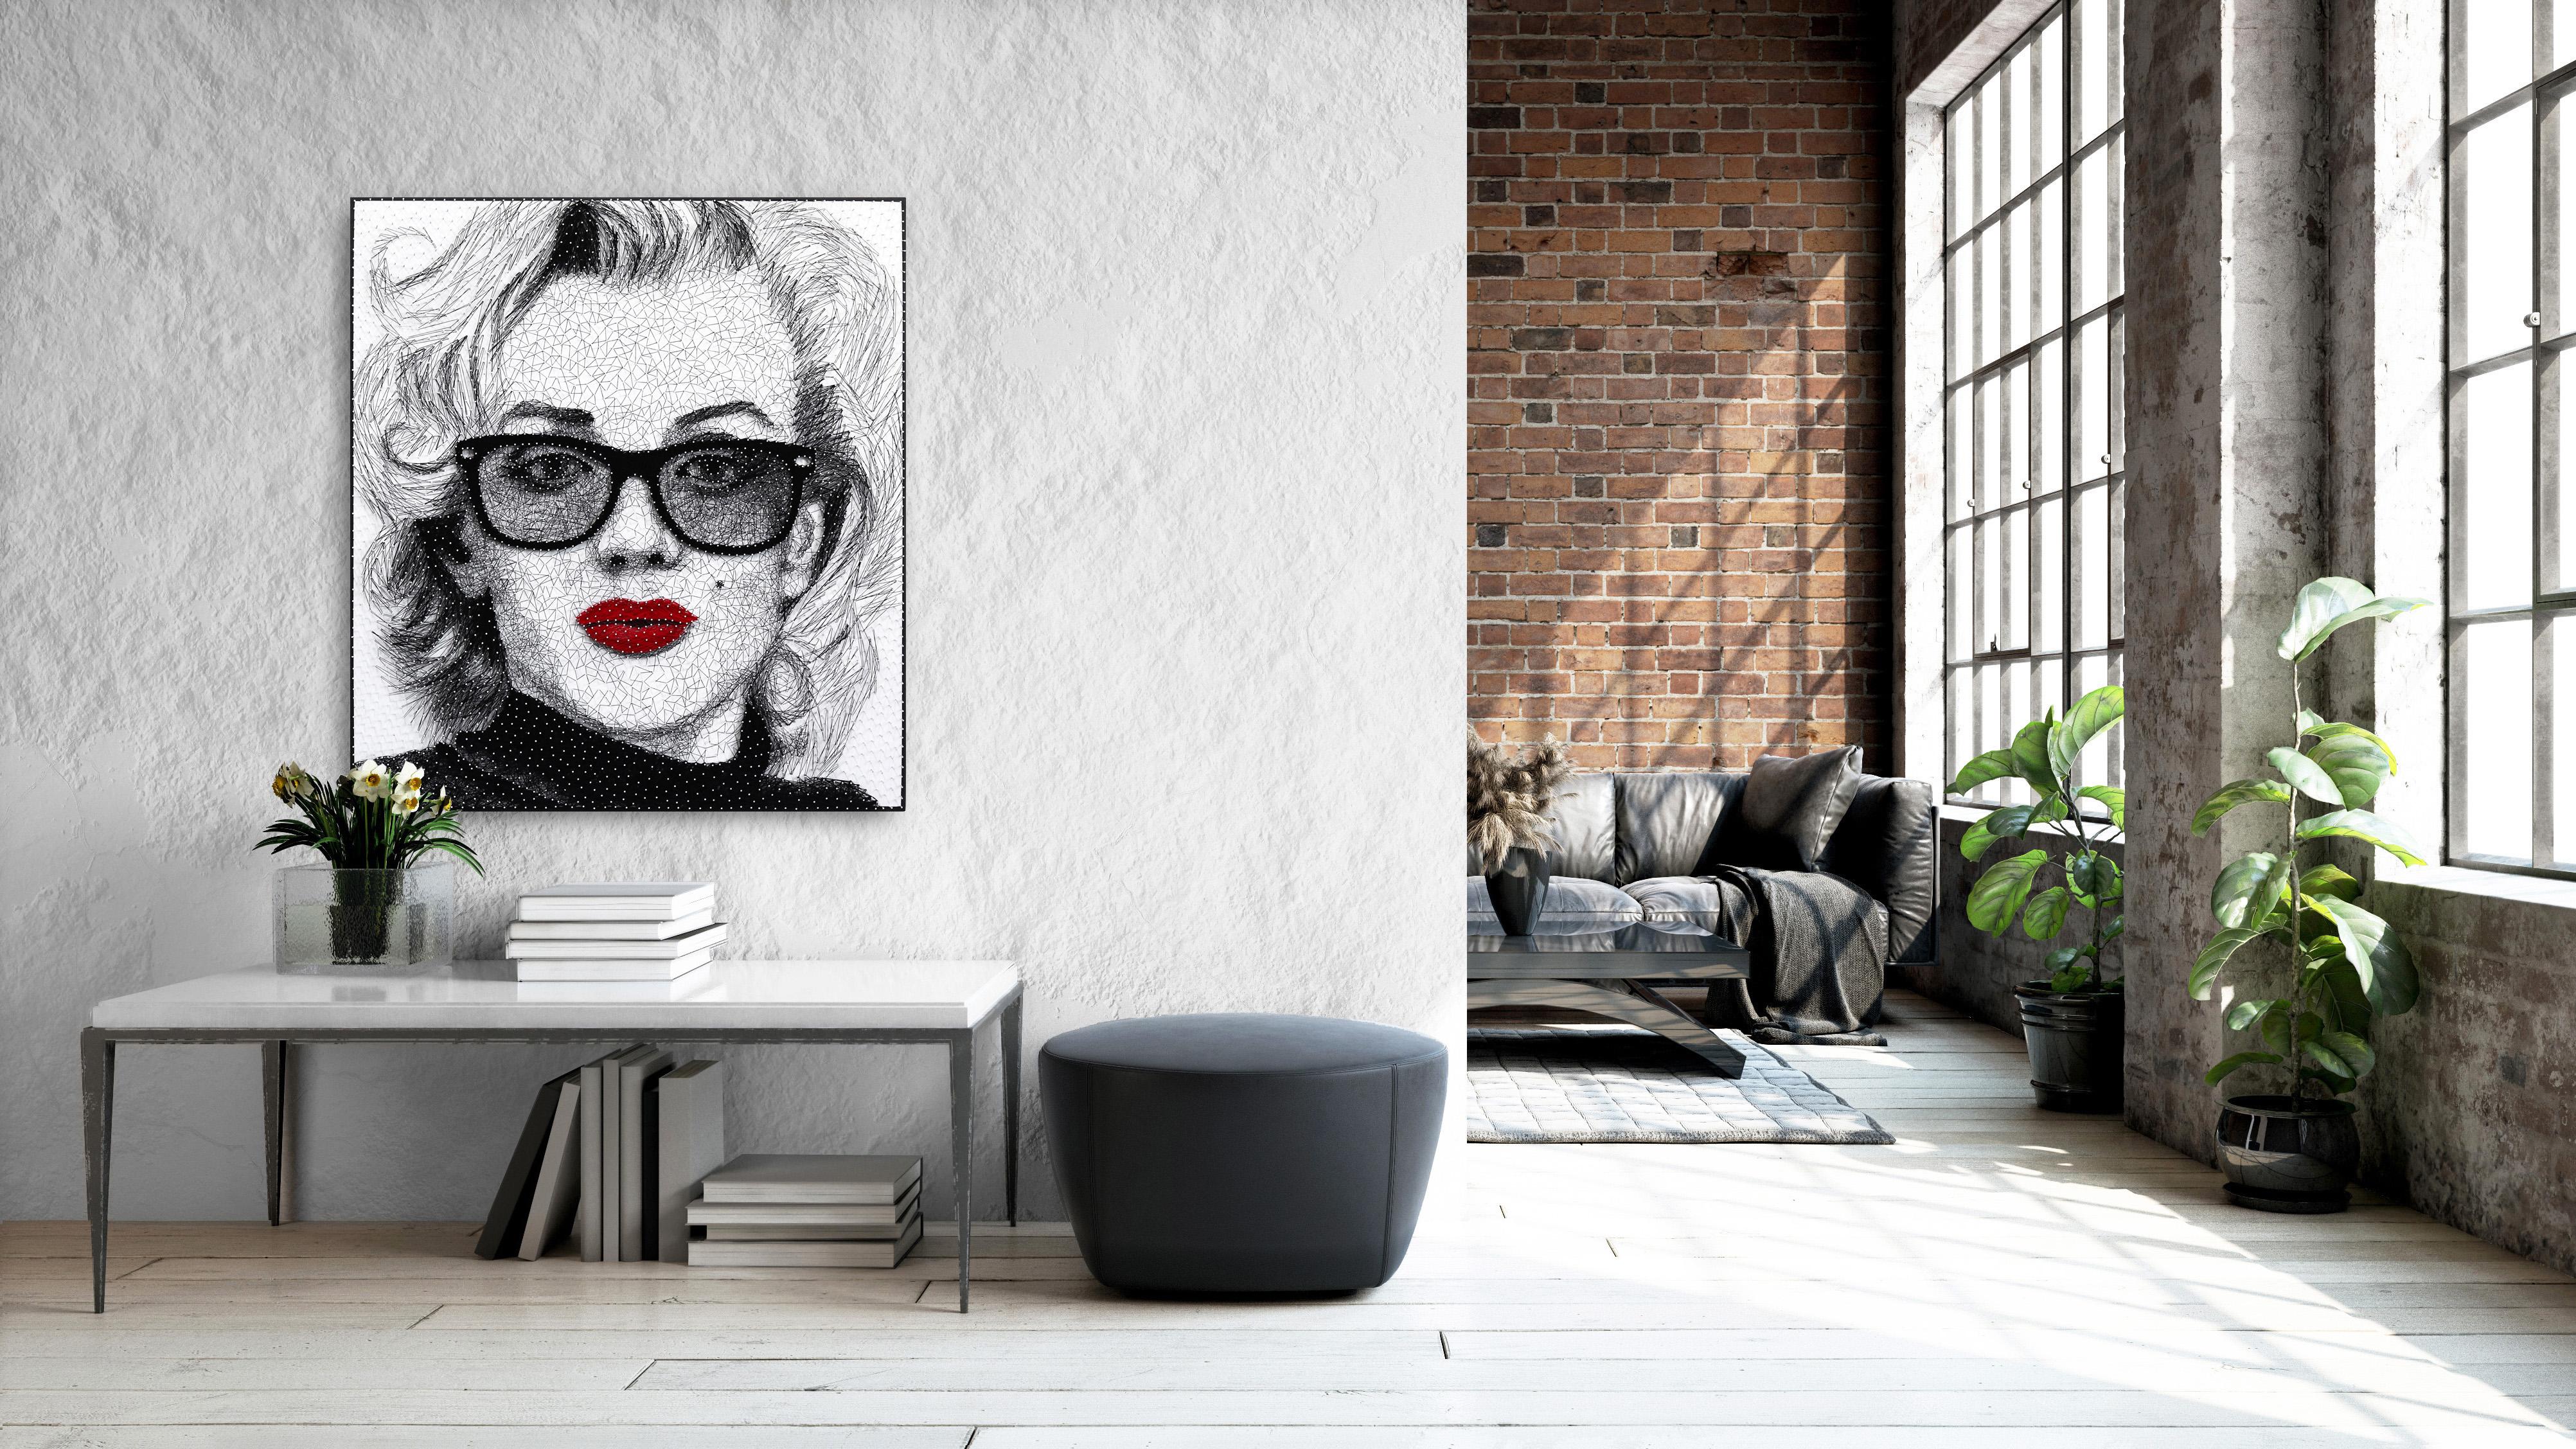 Marilyn Monroe  -  Original Black and White Mixed Media Sculpture String Artwork - Painting by Ricky Hunt